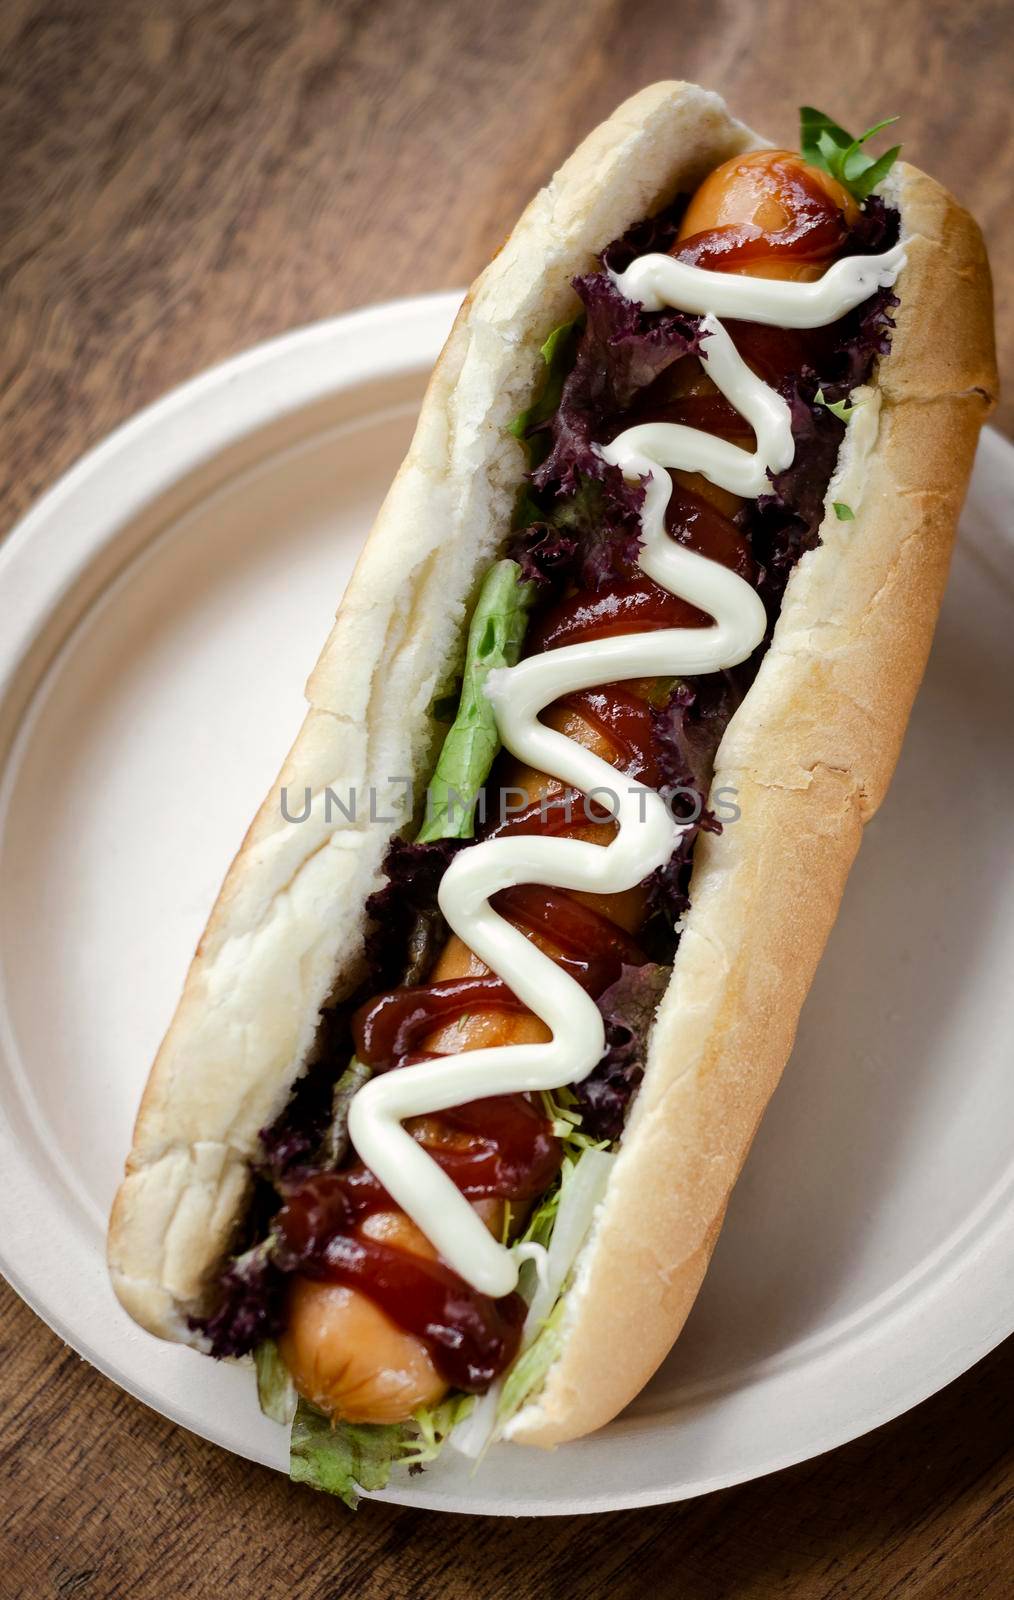 classic hot dog with frankfurter sausage and sauces on wood table